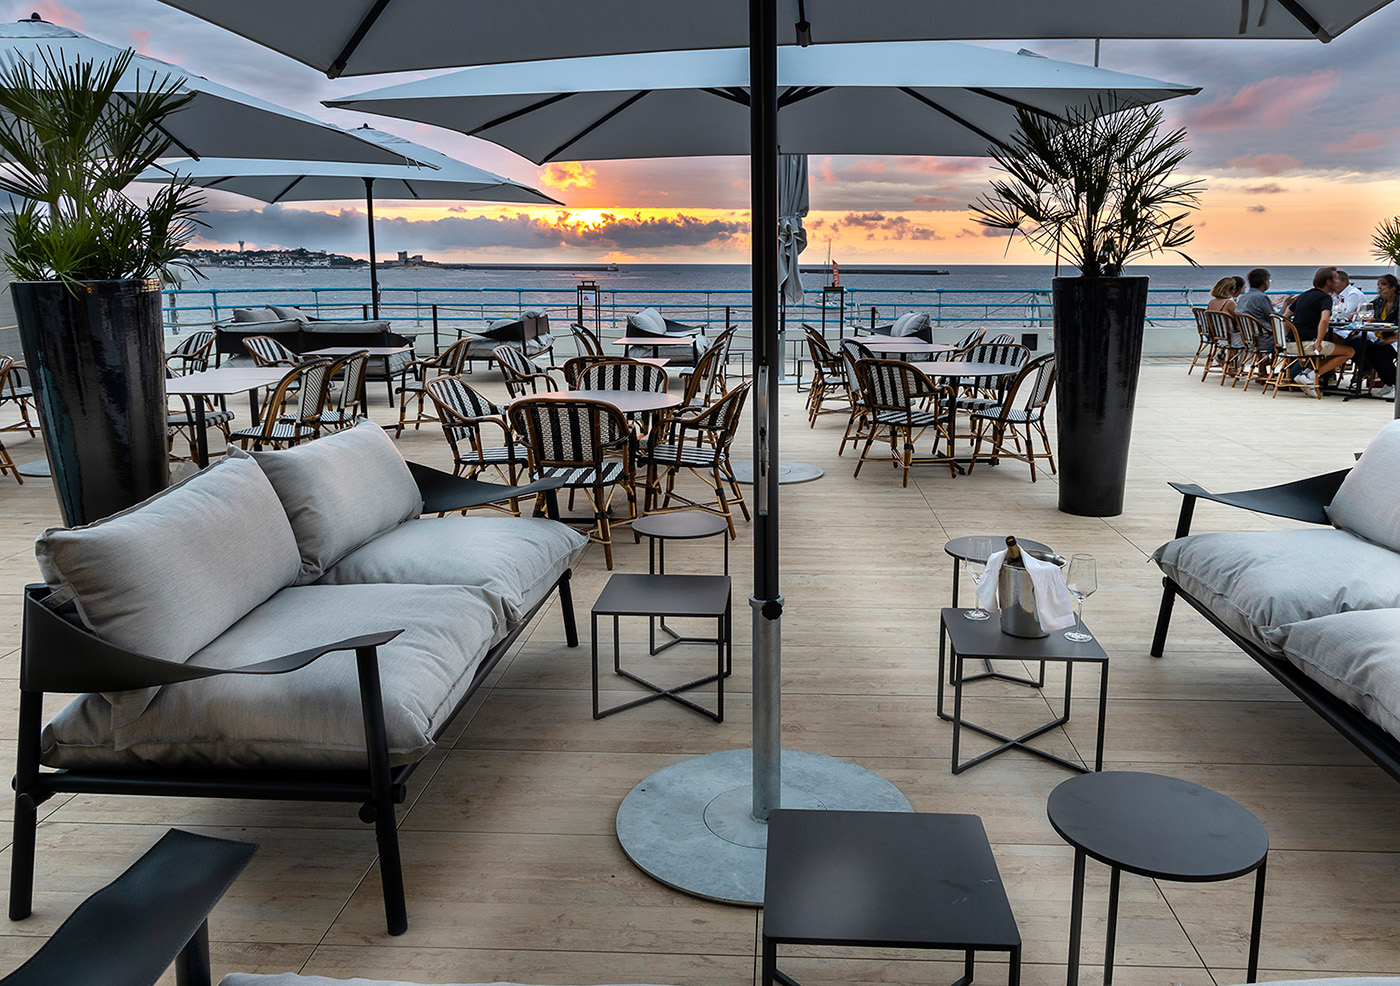 outdoor terrace of the Restaurant L'Atlantique of the Hélianthal hotel and spa in Saint Jean de Luz, 4 star lifestyle hotel designed by the interior design studio jean-philippe nuel, seaside hotel, basque country decoration